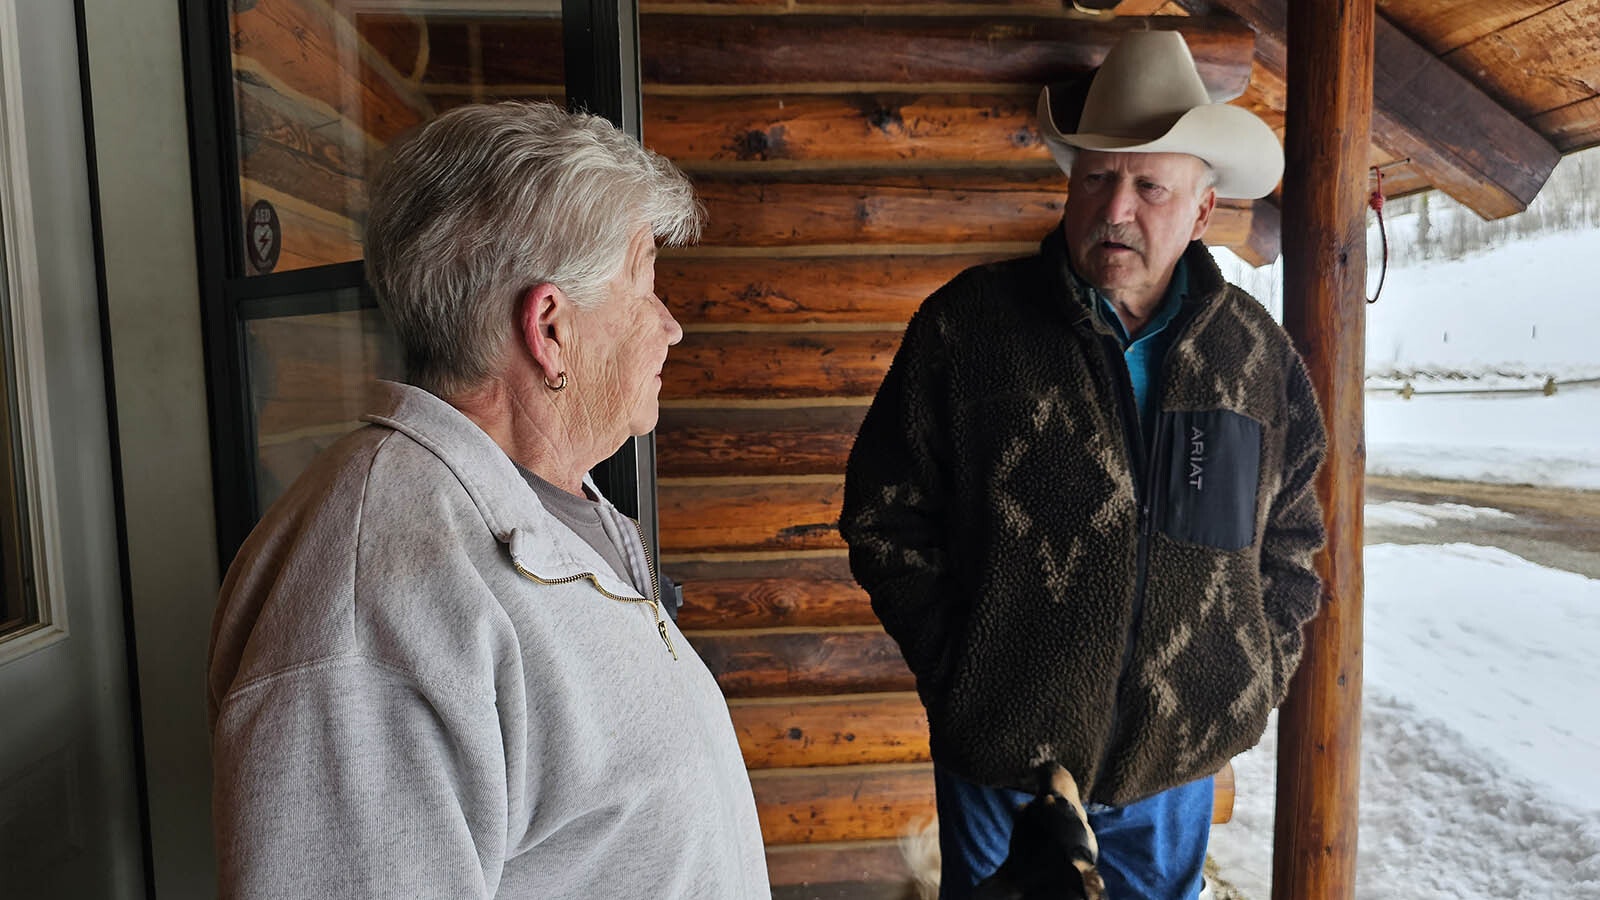 Pat Burroughs talks with Sublette County Commissioner Dave Stephens about her concerns with Homestead Resort.